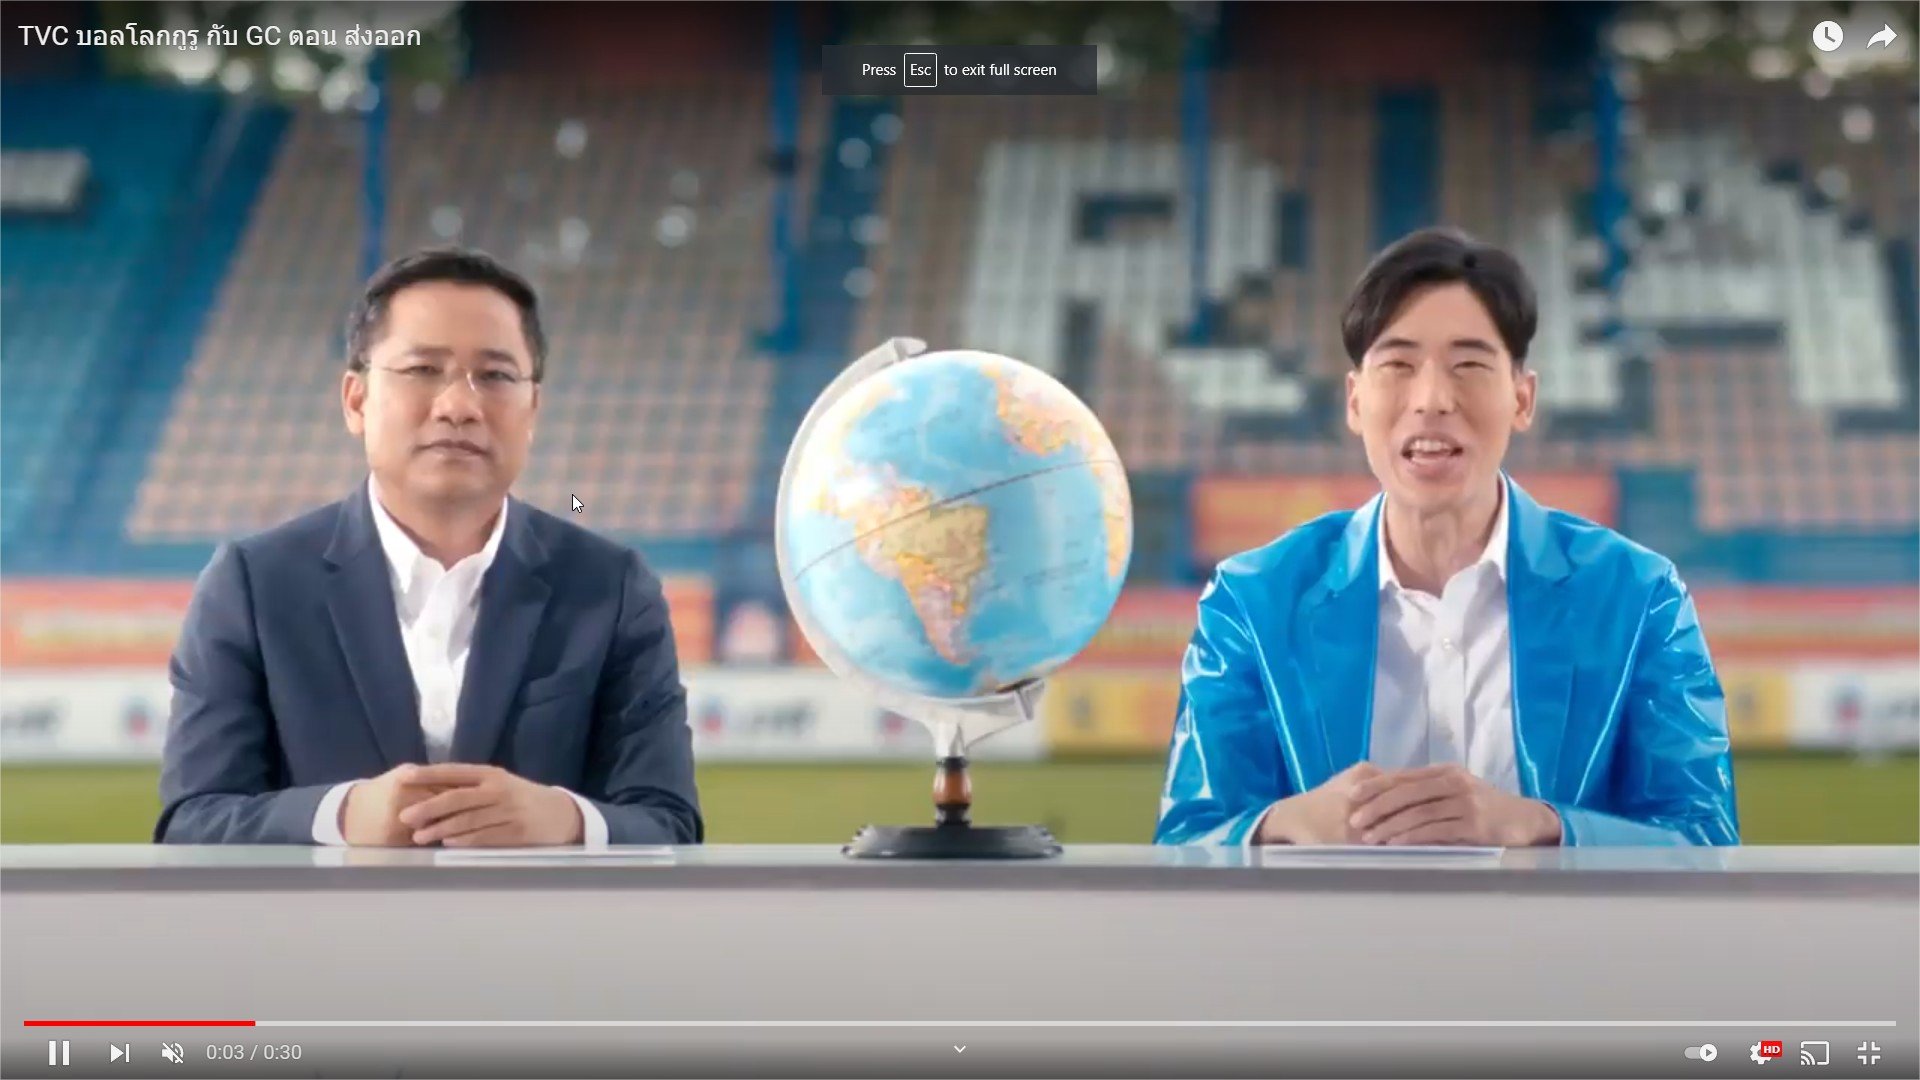 Isn’t it cool that the “FIFA World Cup Guru” is traveling to Rayong? Watch all the action here